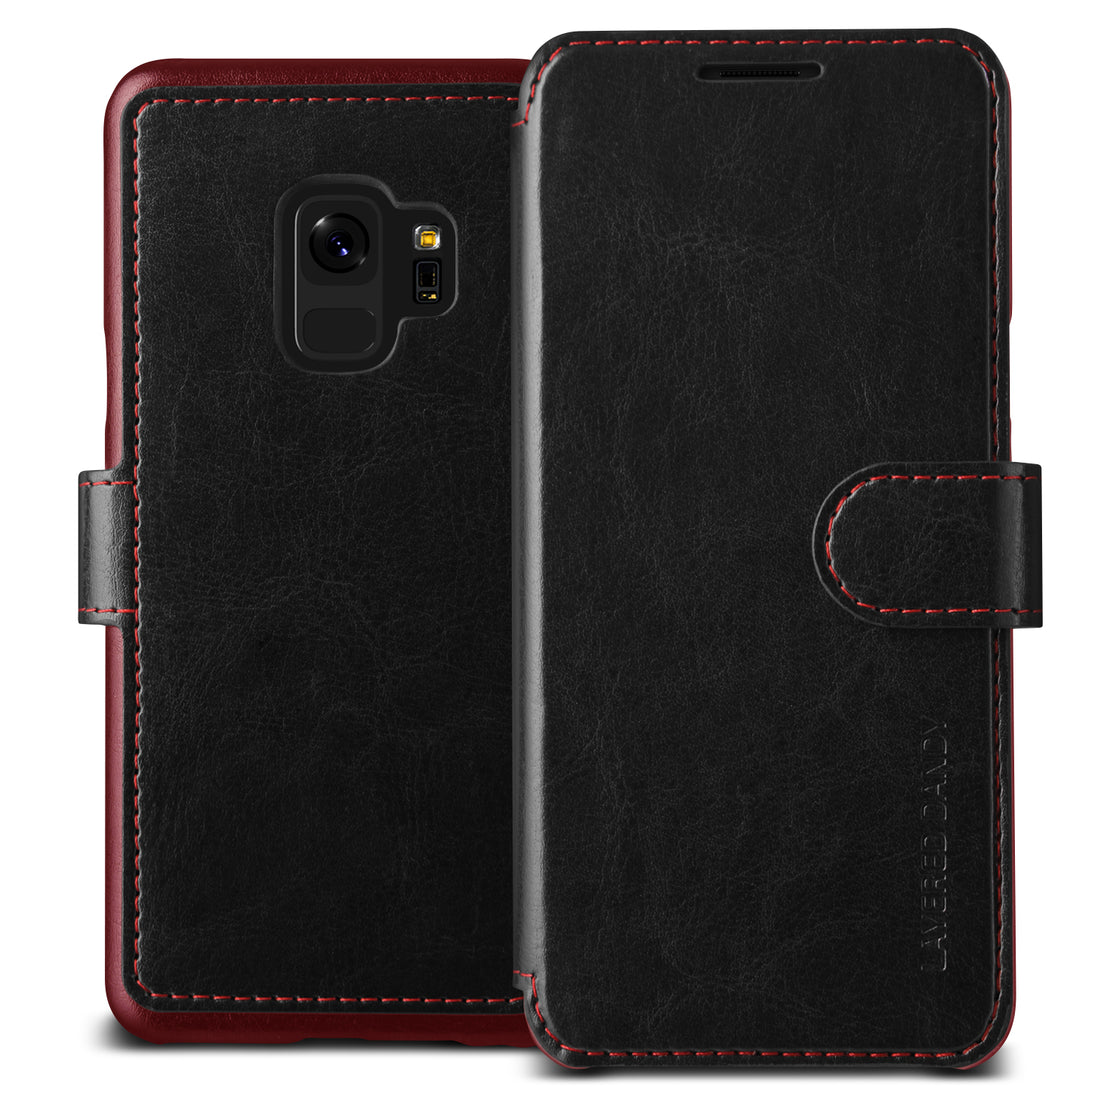 Samsung Galaxy S9 wallet rugged case with multiple durable and convenient card slot with sleek minimalism by VRS